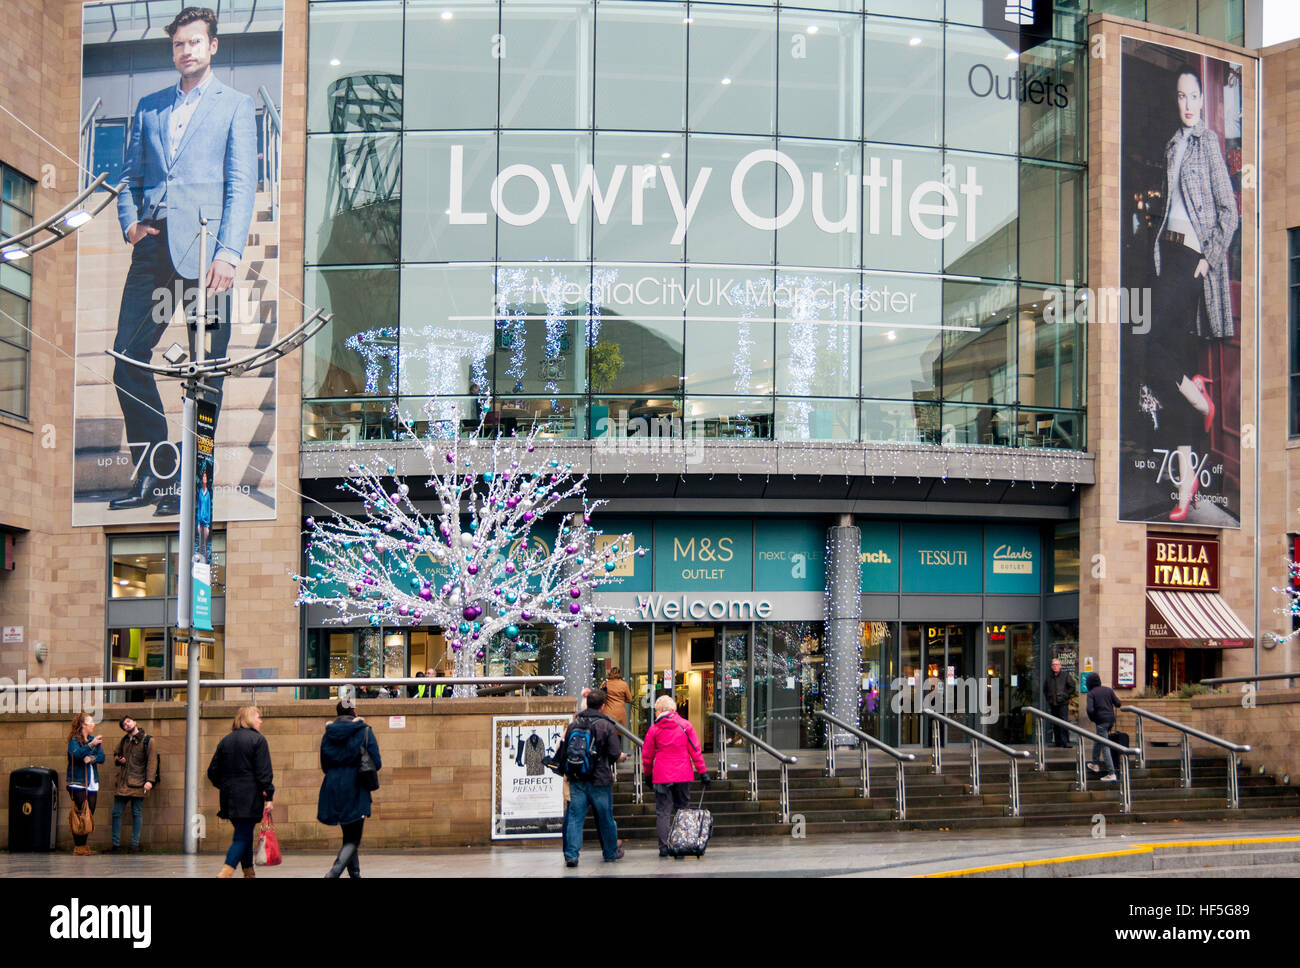 The Lowry Outlet Mall Mediacityuk During the Christmas Period Stock Photo